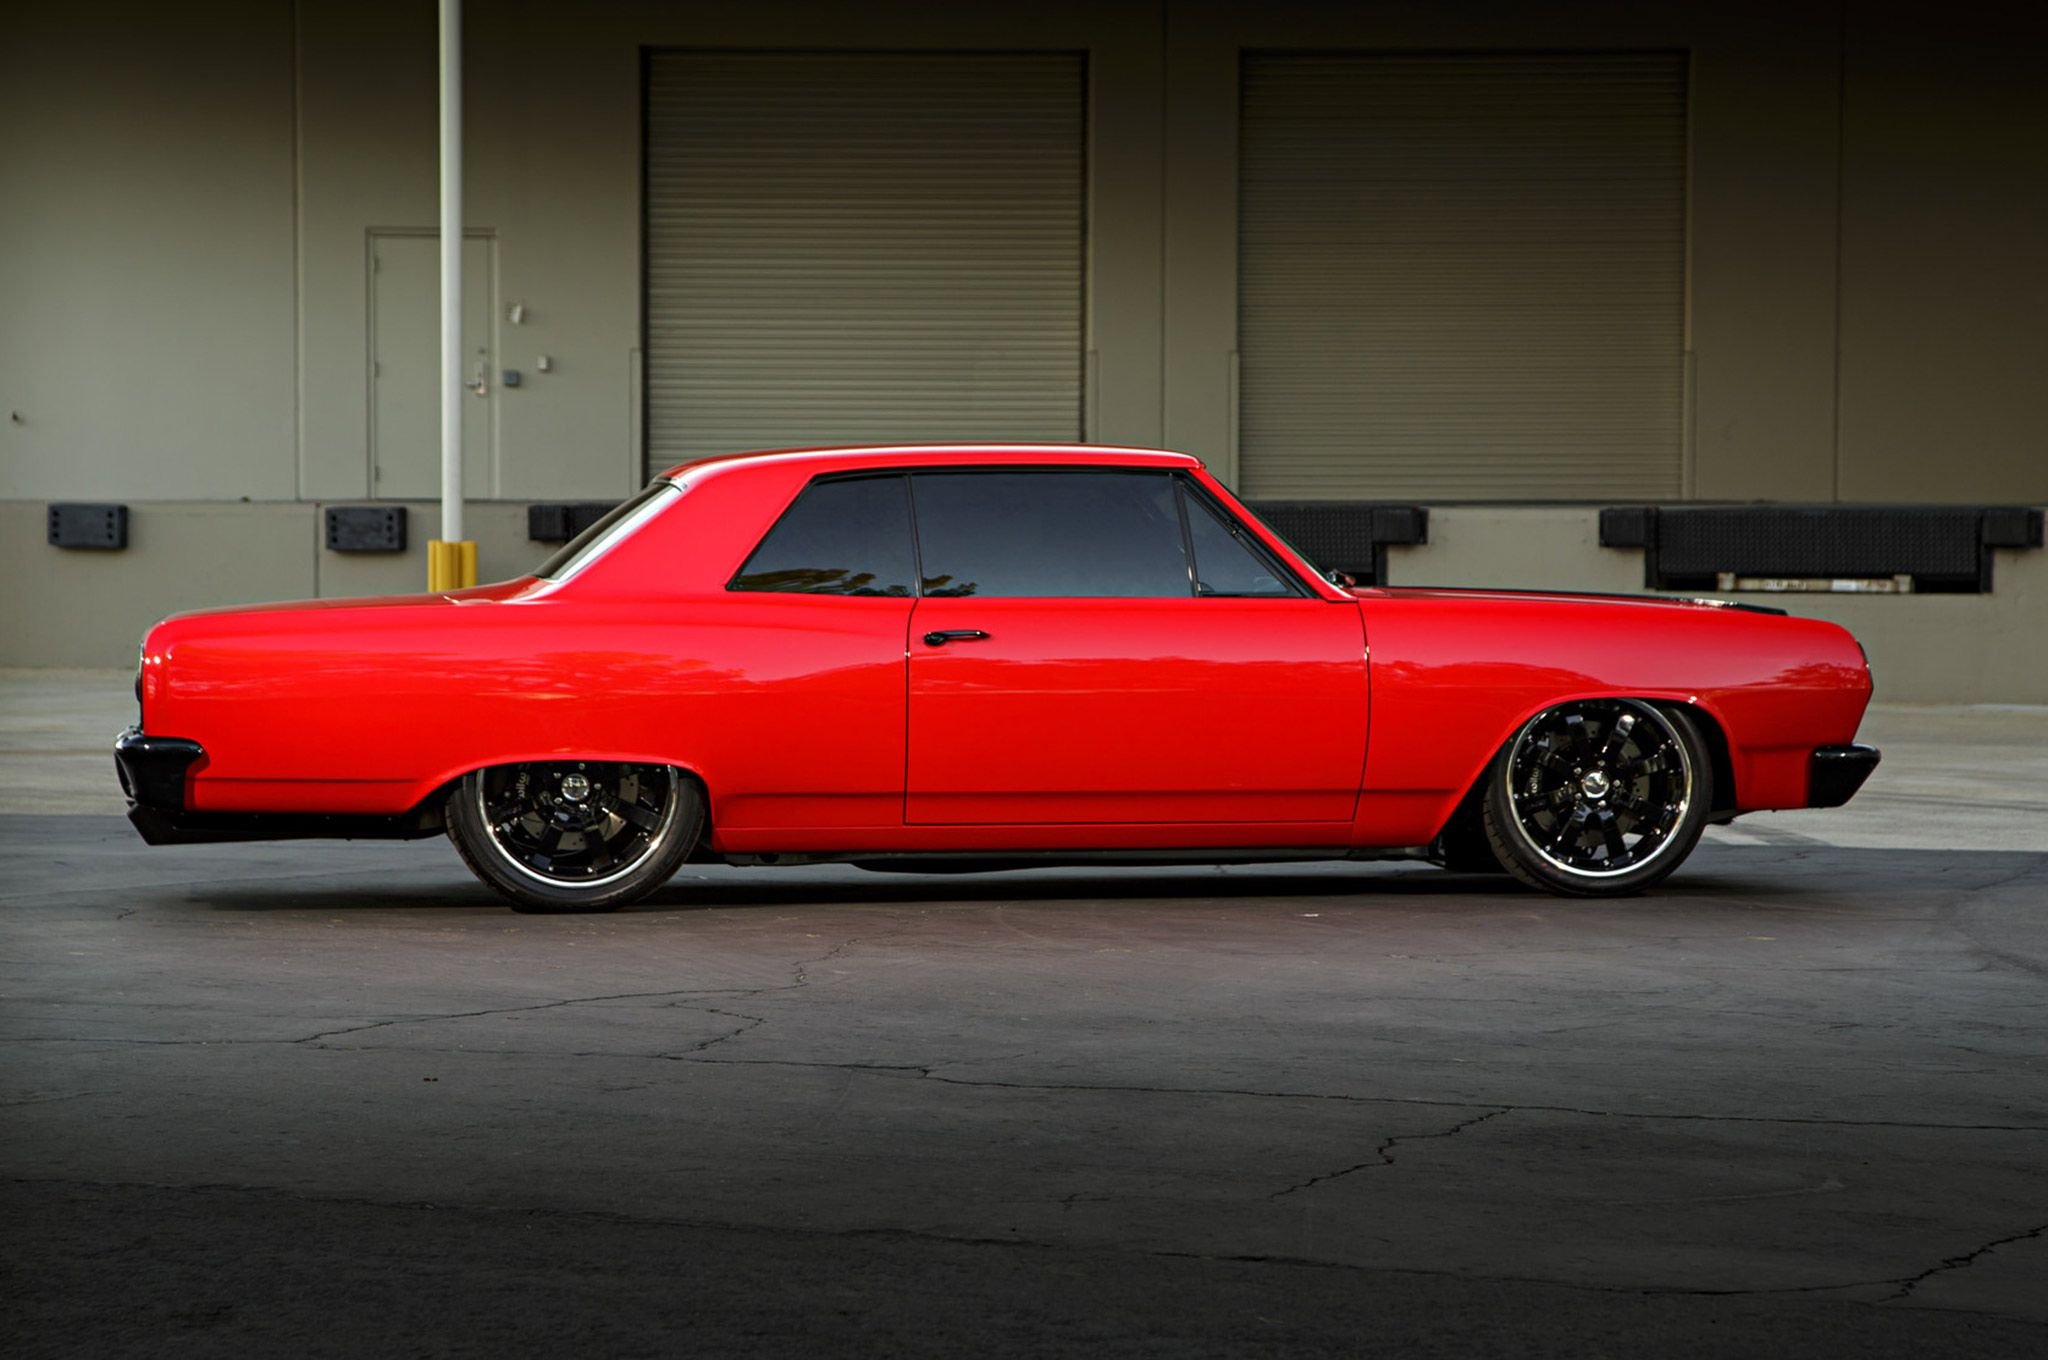 1965 Chevrolet Chevelle Muscle Classic Hot Rod Rods Hotrod Custom Chevy Chevrolet